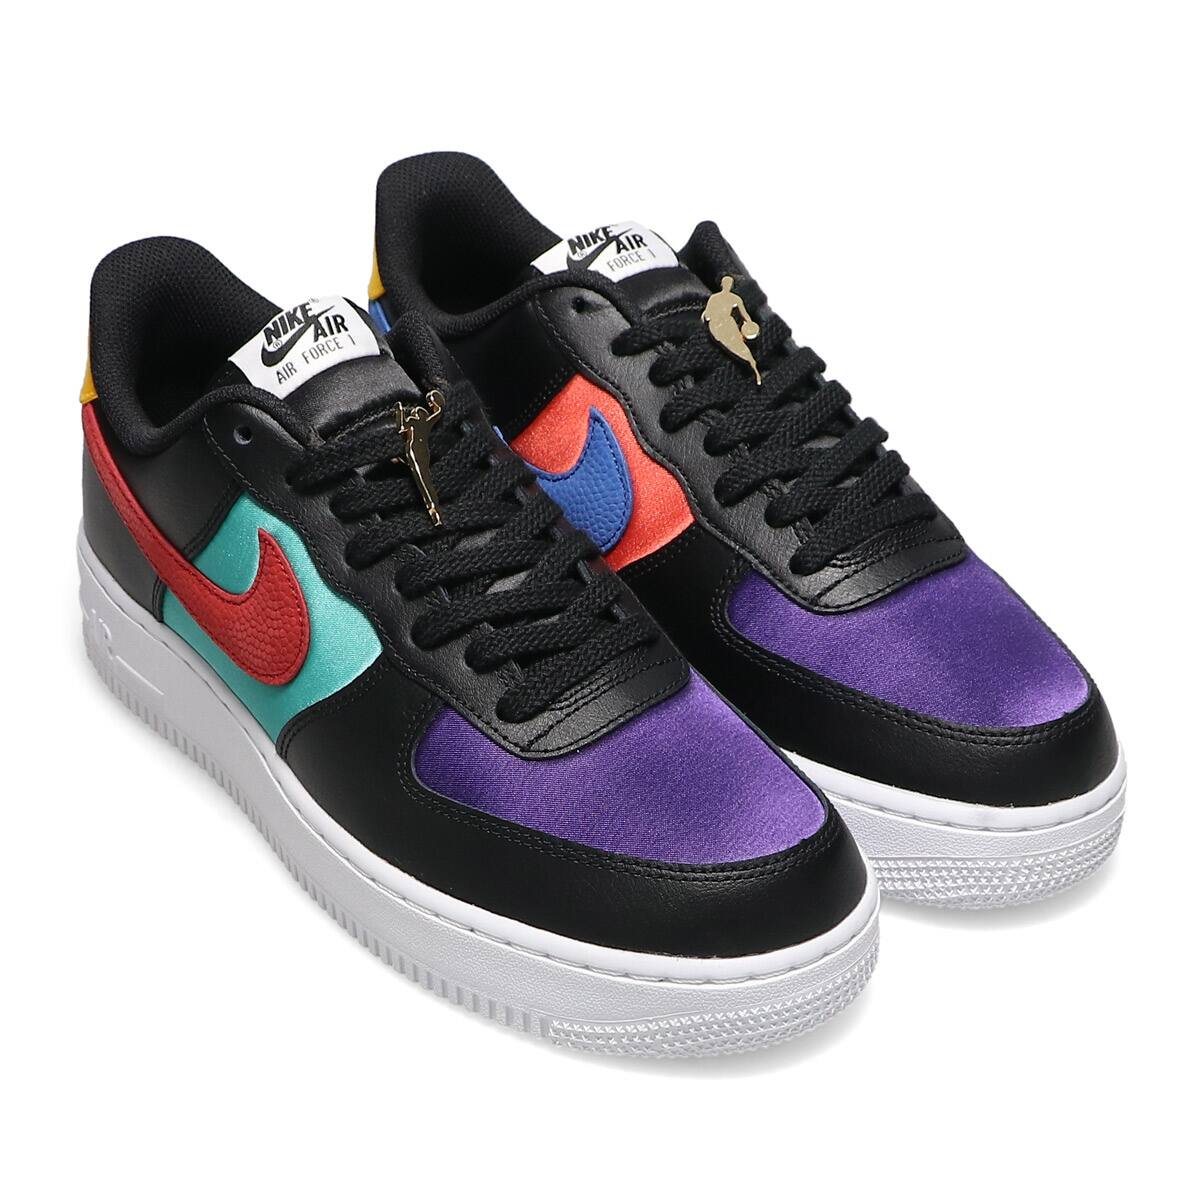 NIKE AIR FORCE 1 '07 LV8 EMB BLACK/GYM RED-WASHED TEAL-COURT 